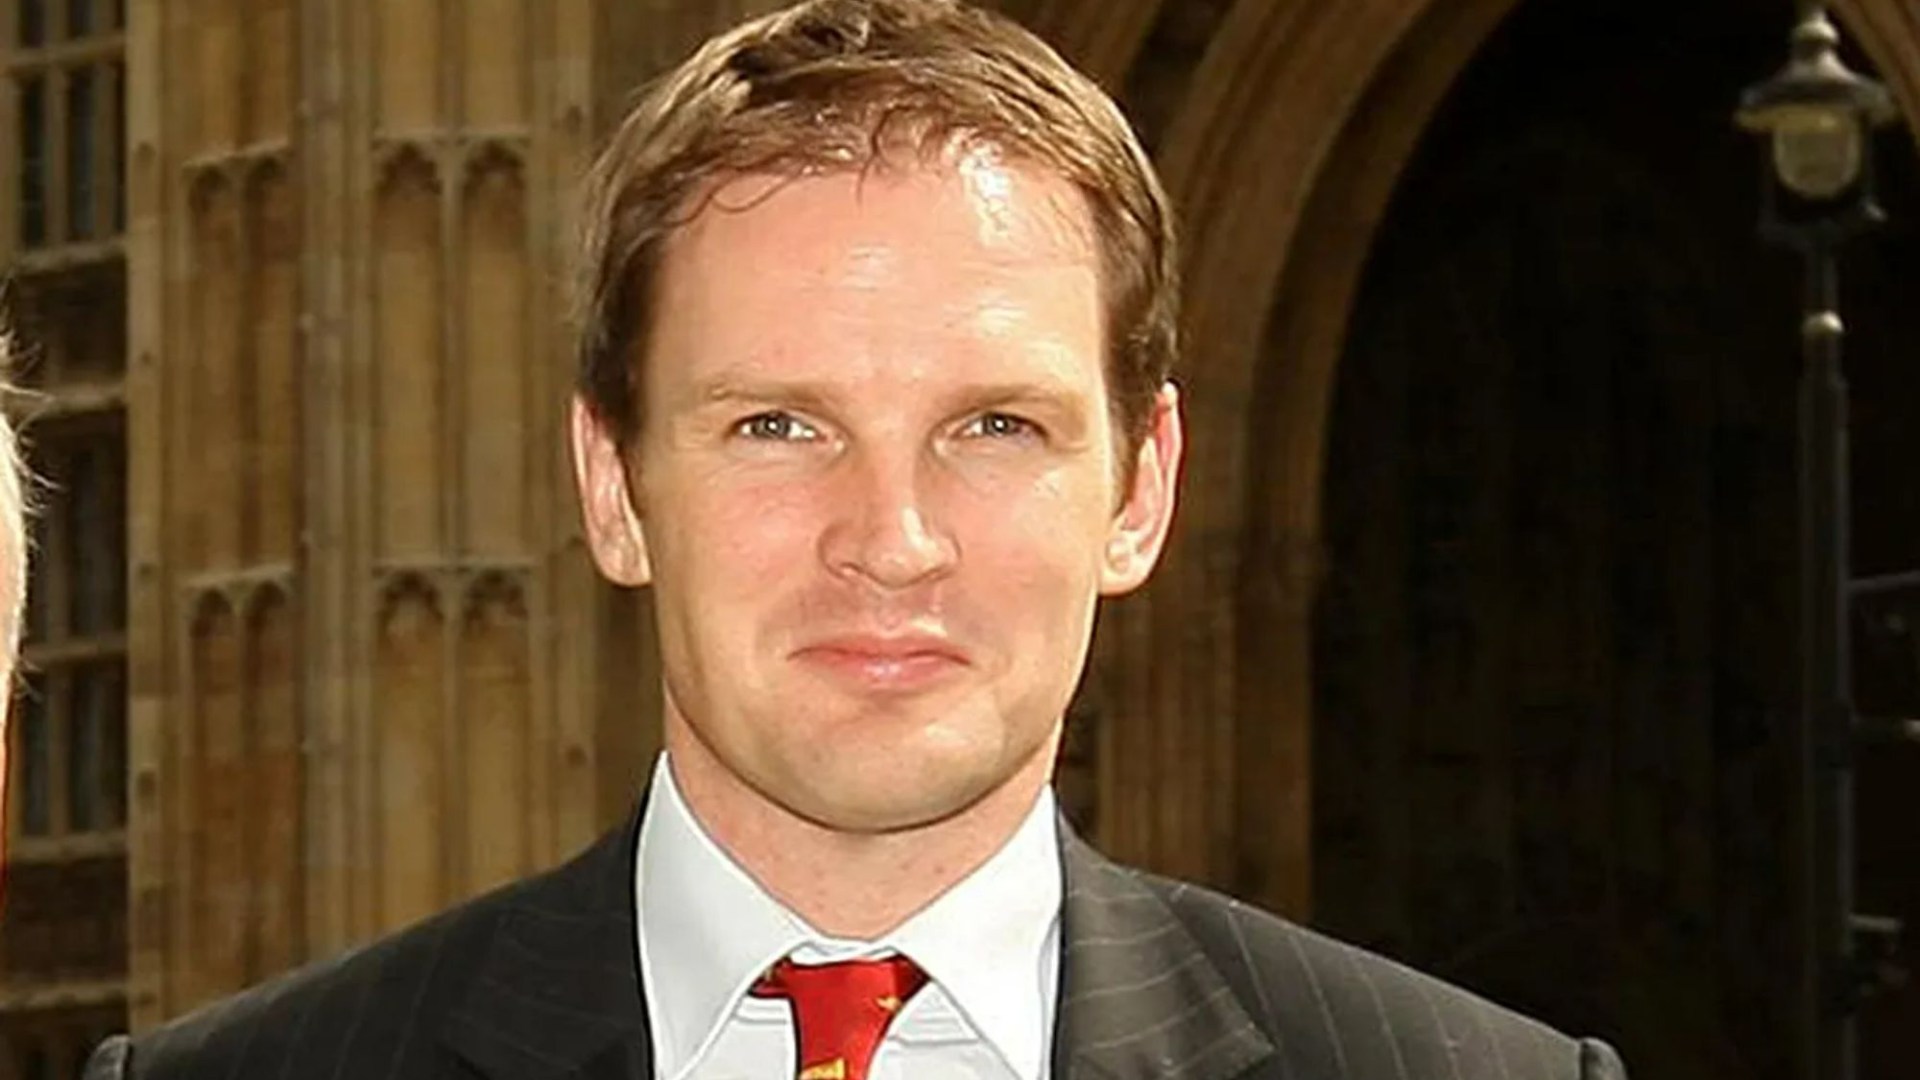 Top Tory MP Dan Poulter defects to Labour & accuses govt of failing the NHS [Video]